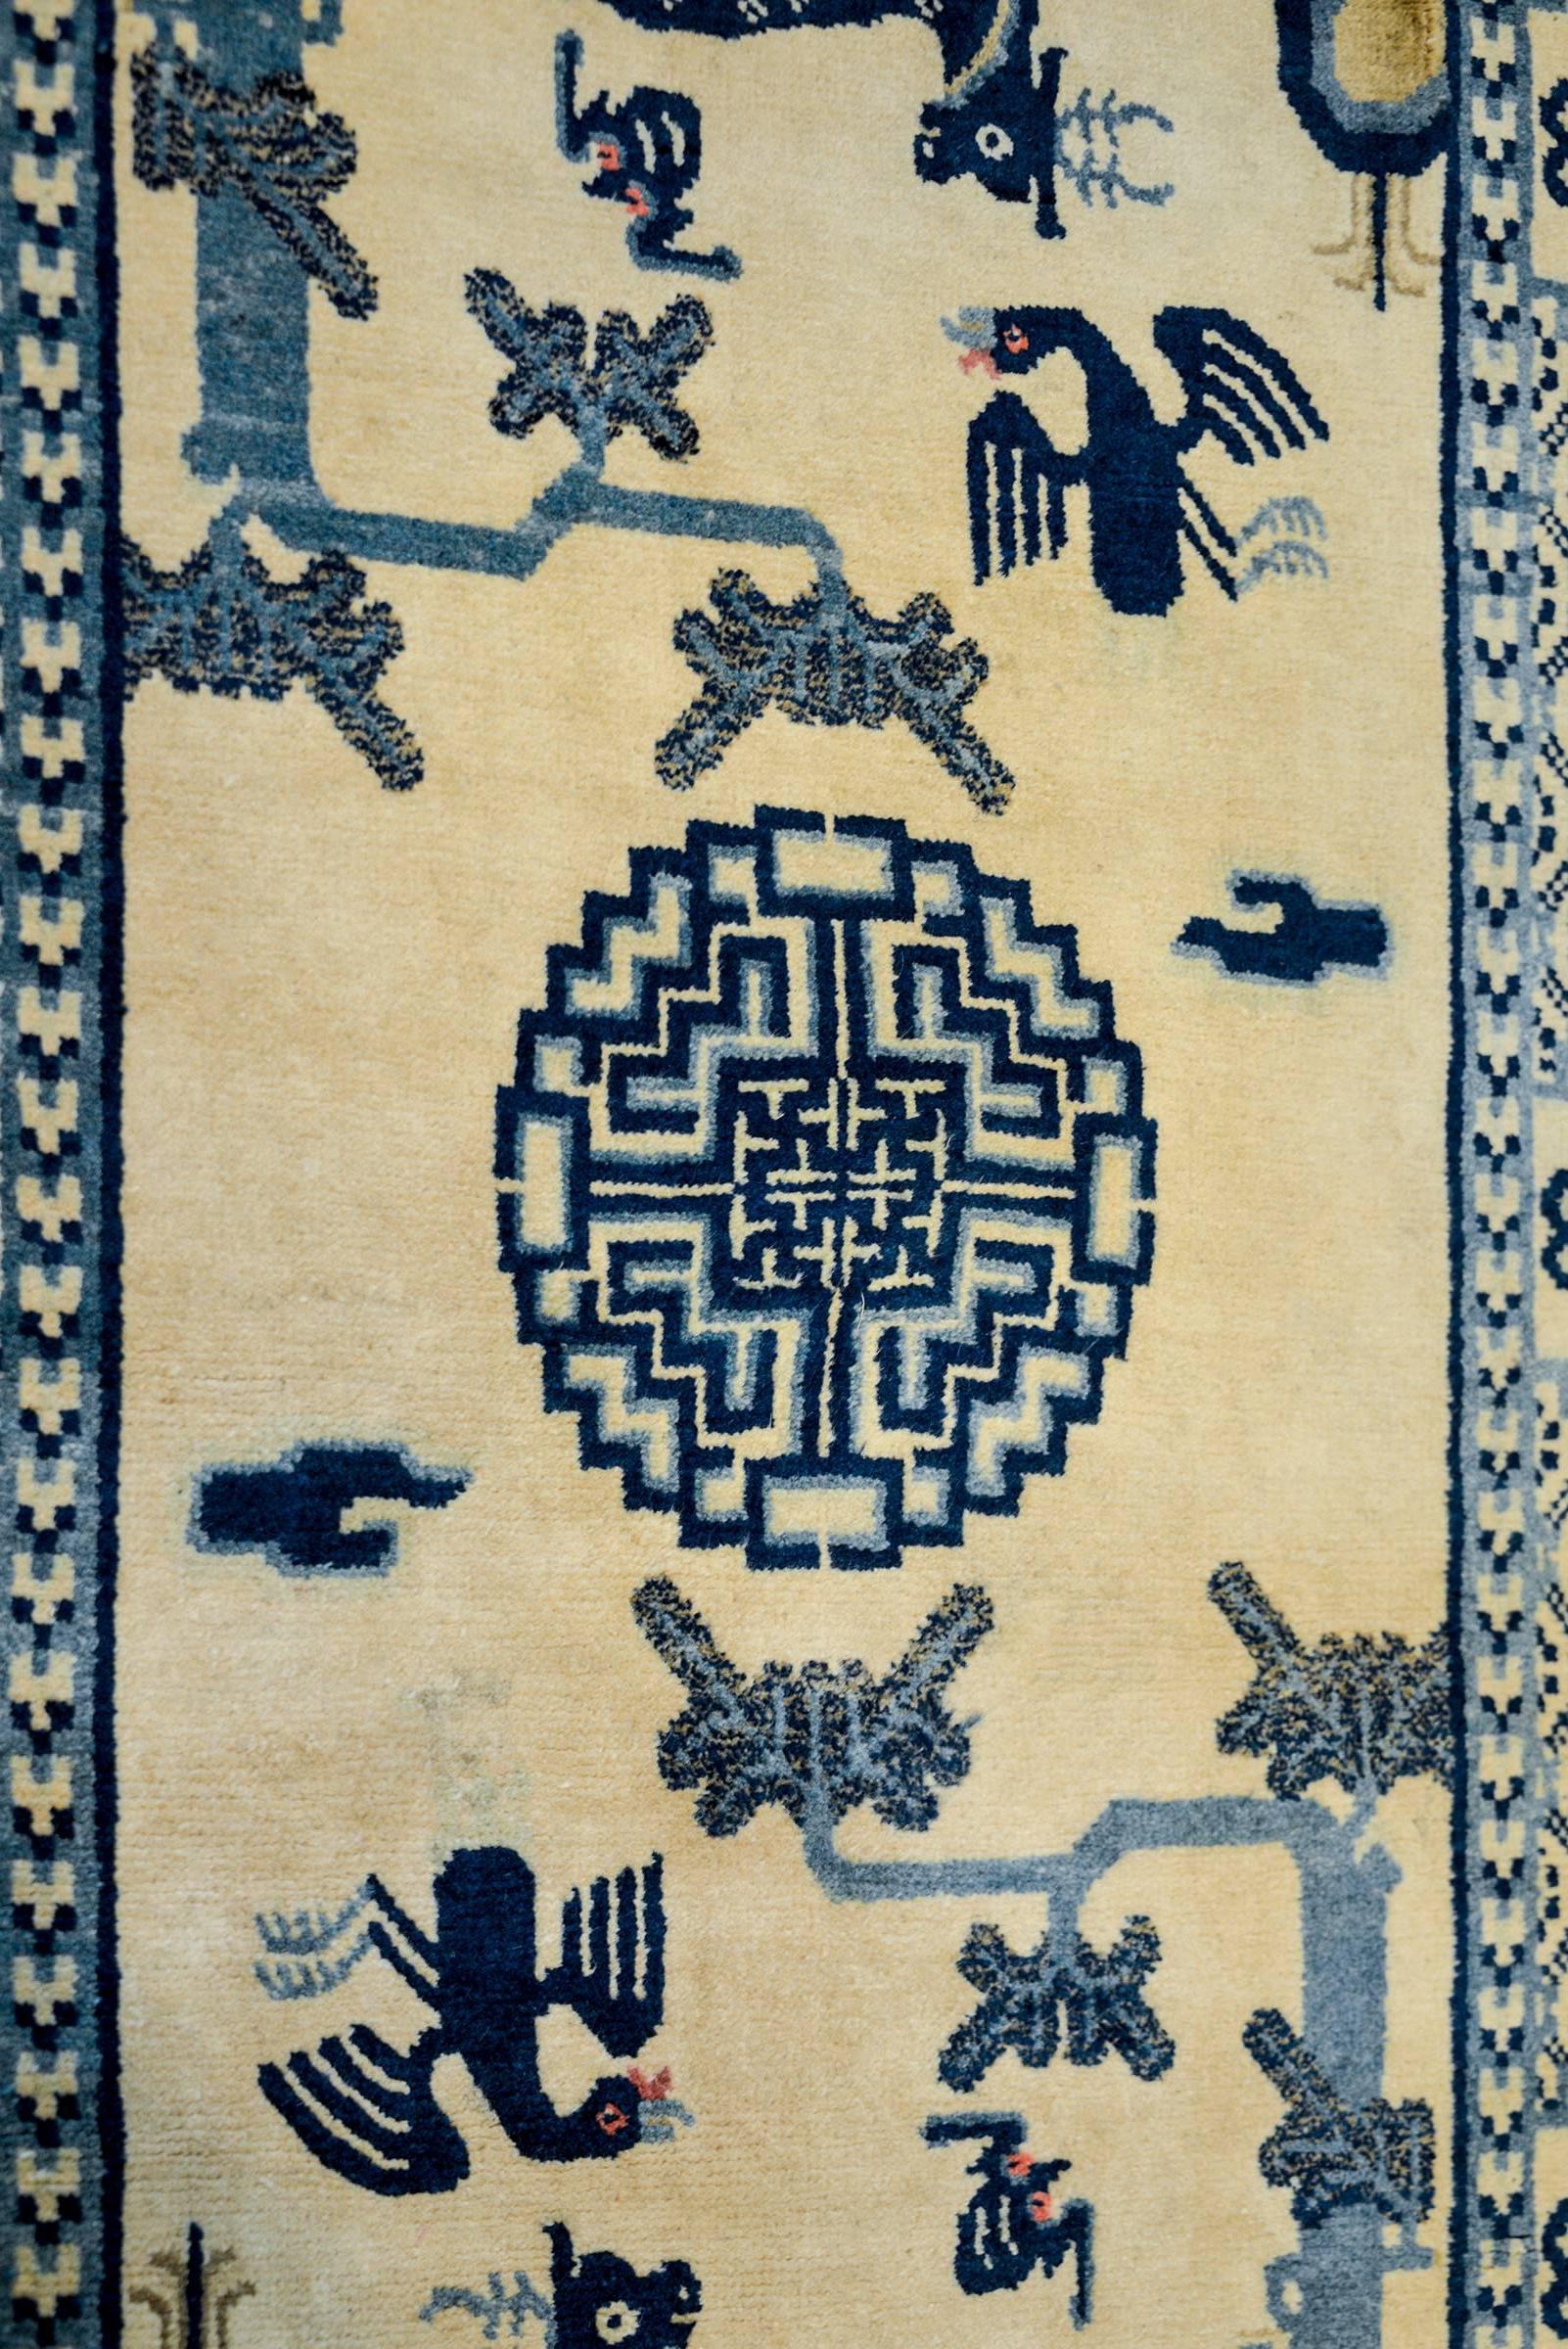 An incredible late 19th century Chinese Peking rug with a beautiful pictorial pattern with deer, phoenix, bats, and a tree flanking a central medallion all woven in light and dark indigo on a cream colored background. The border is wide containing